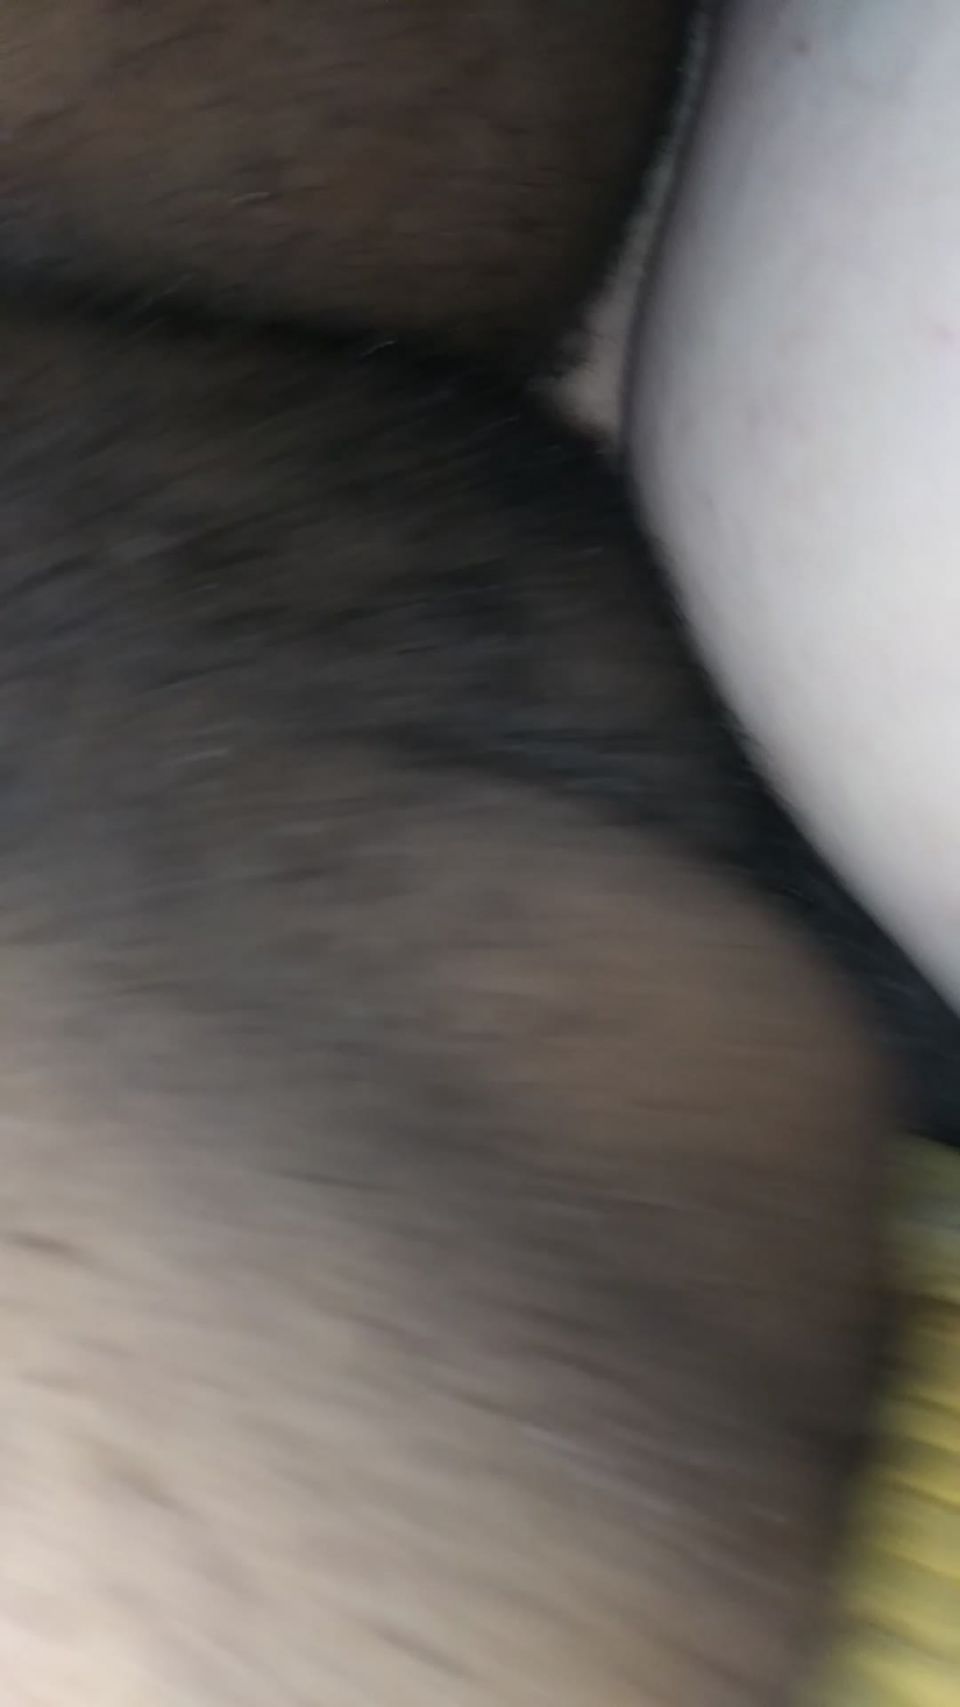 M@nyV1ds - Shadowgodking - That side anal peanut butter booty